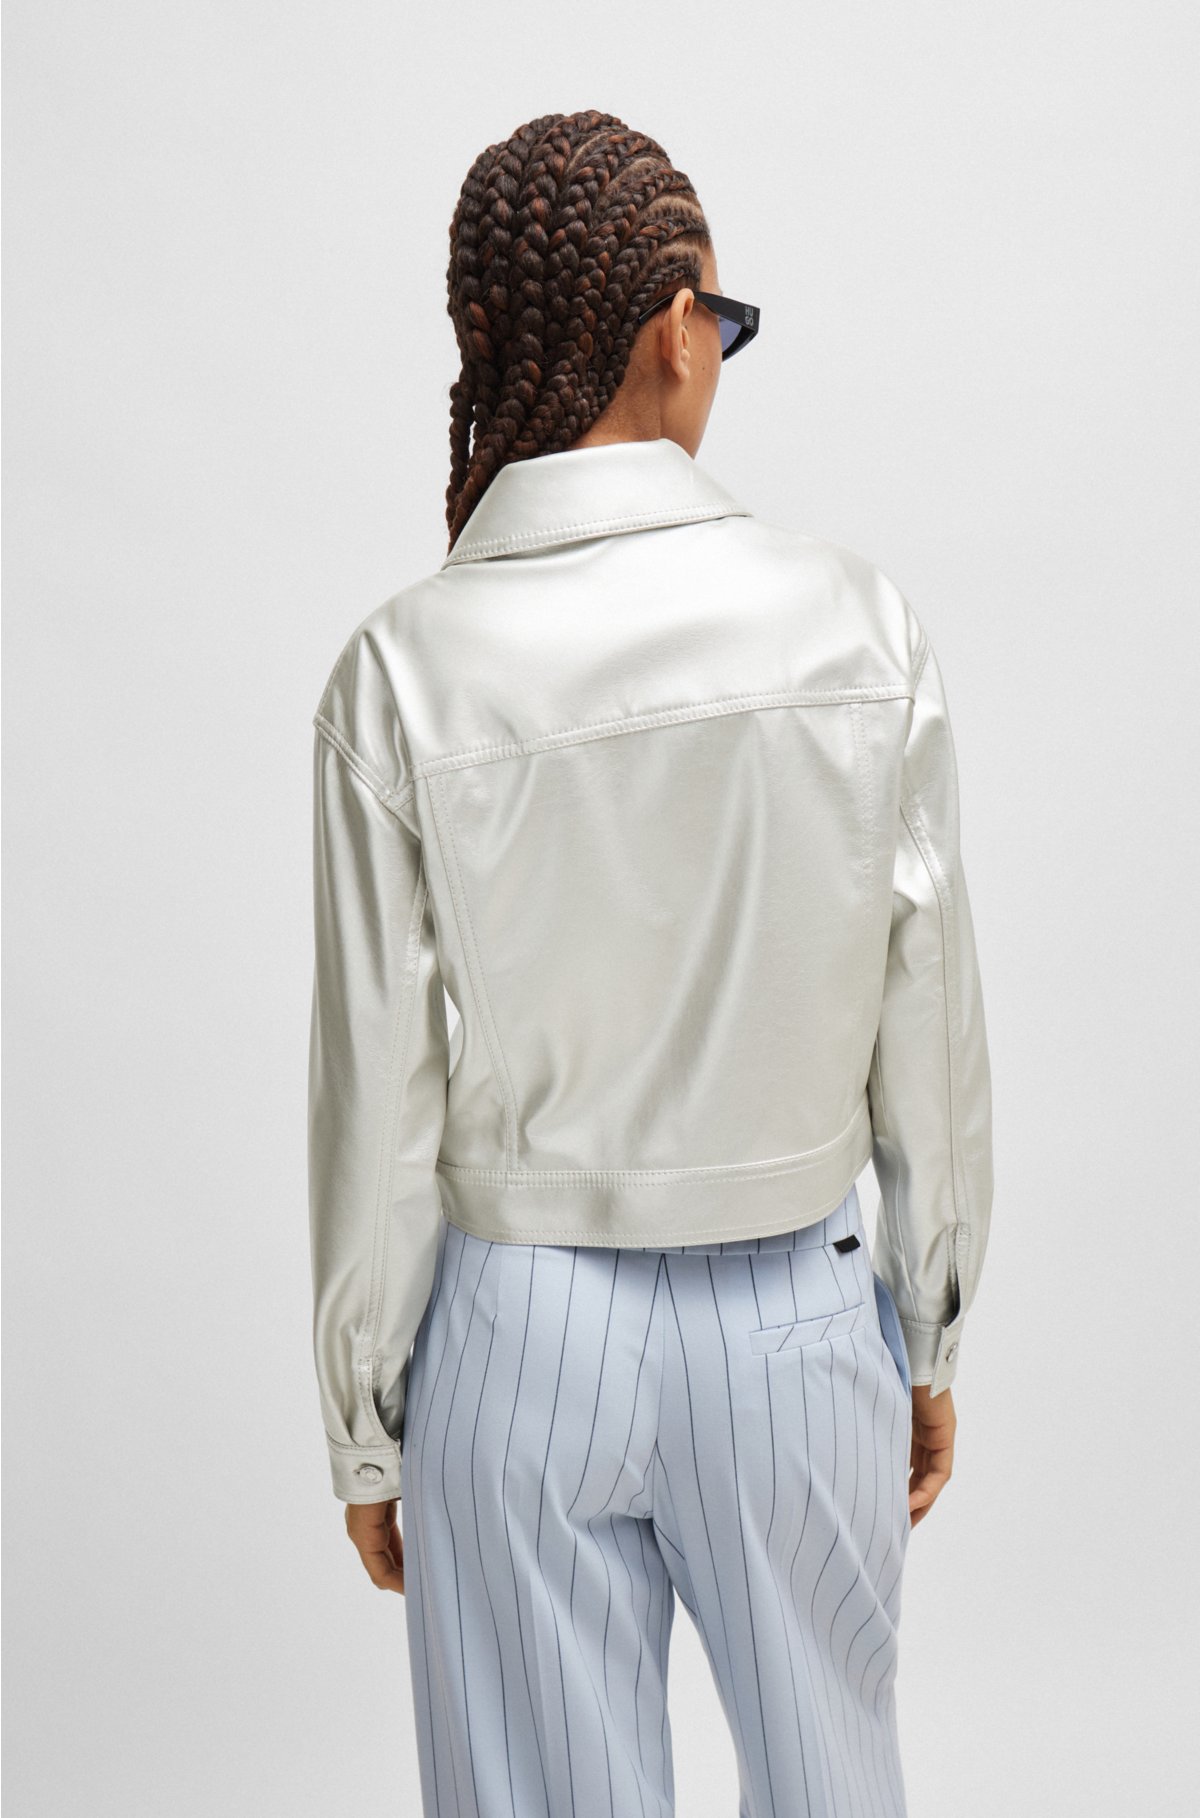 Relaxed-fit jacket in metallic faux leather, Silver